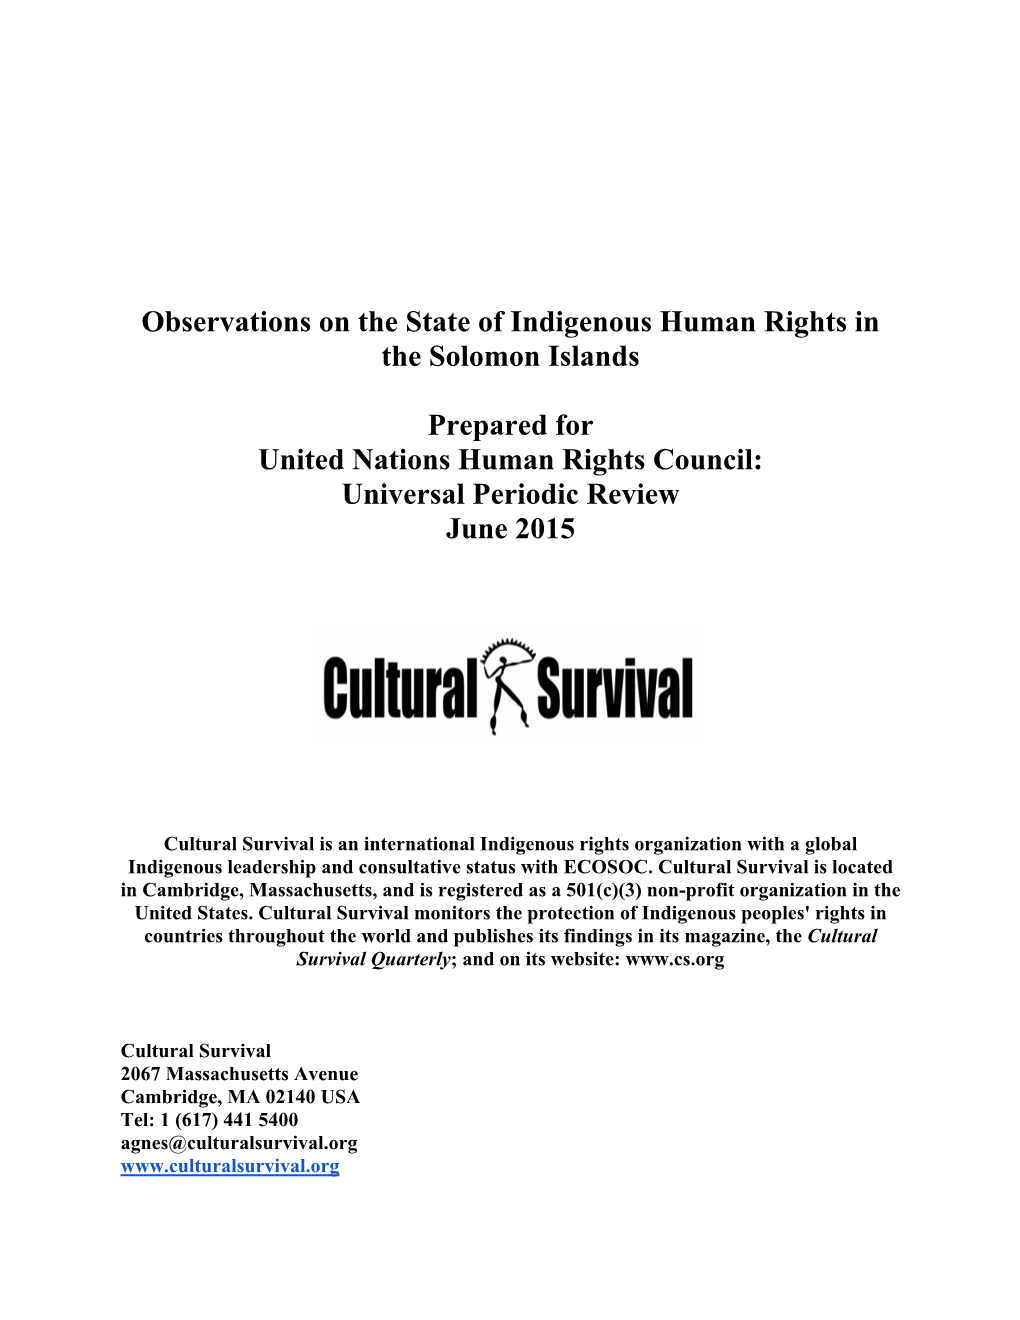 Observations on the State of Indigenous Human Rights in the Solomon Islands